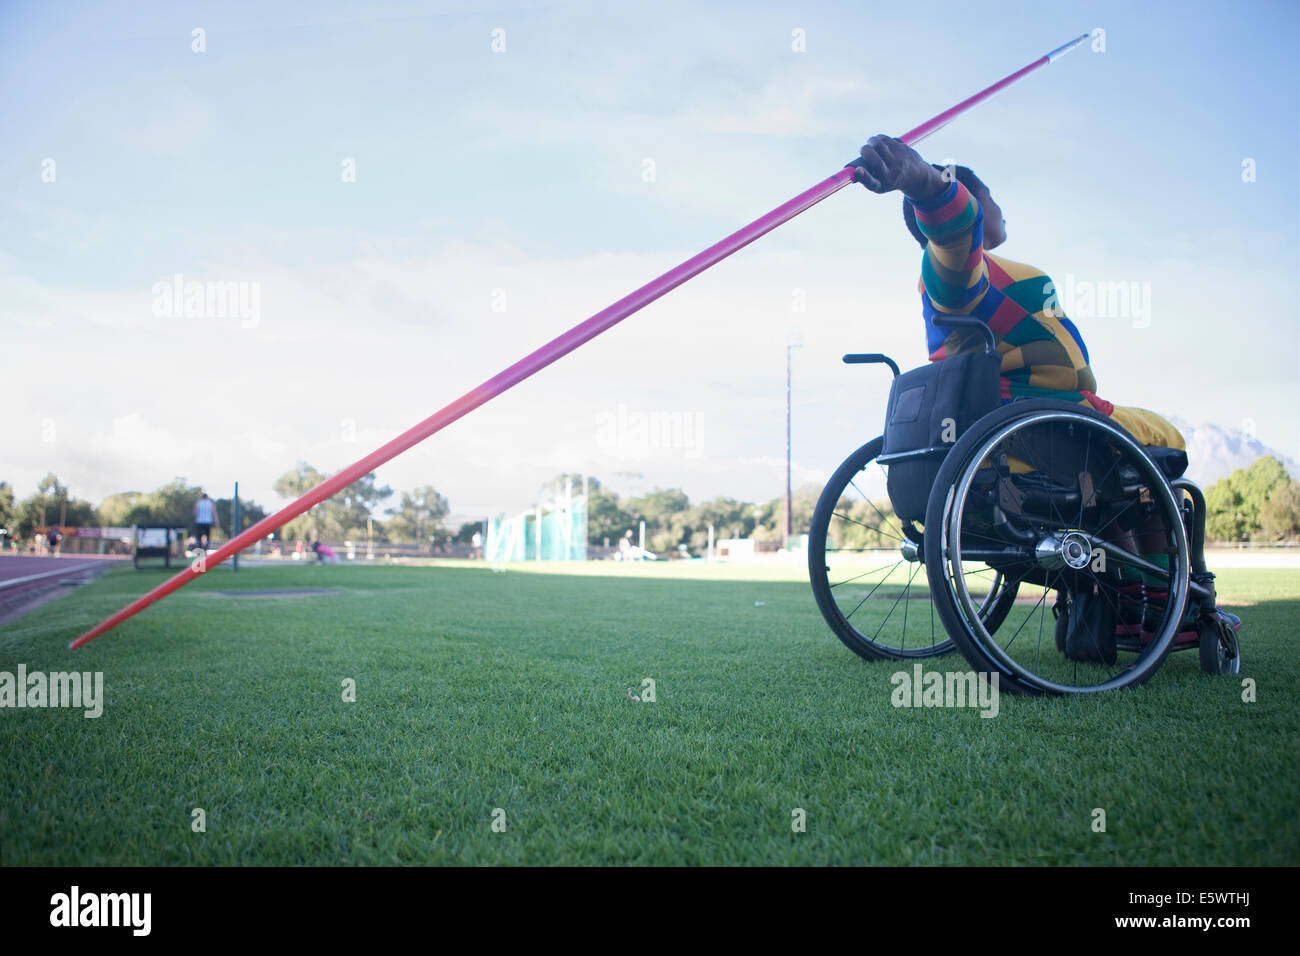 Sedia a rotelle javelin thrower Foto Stock